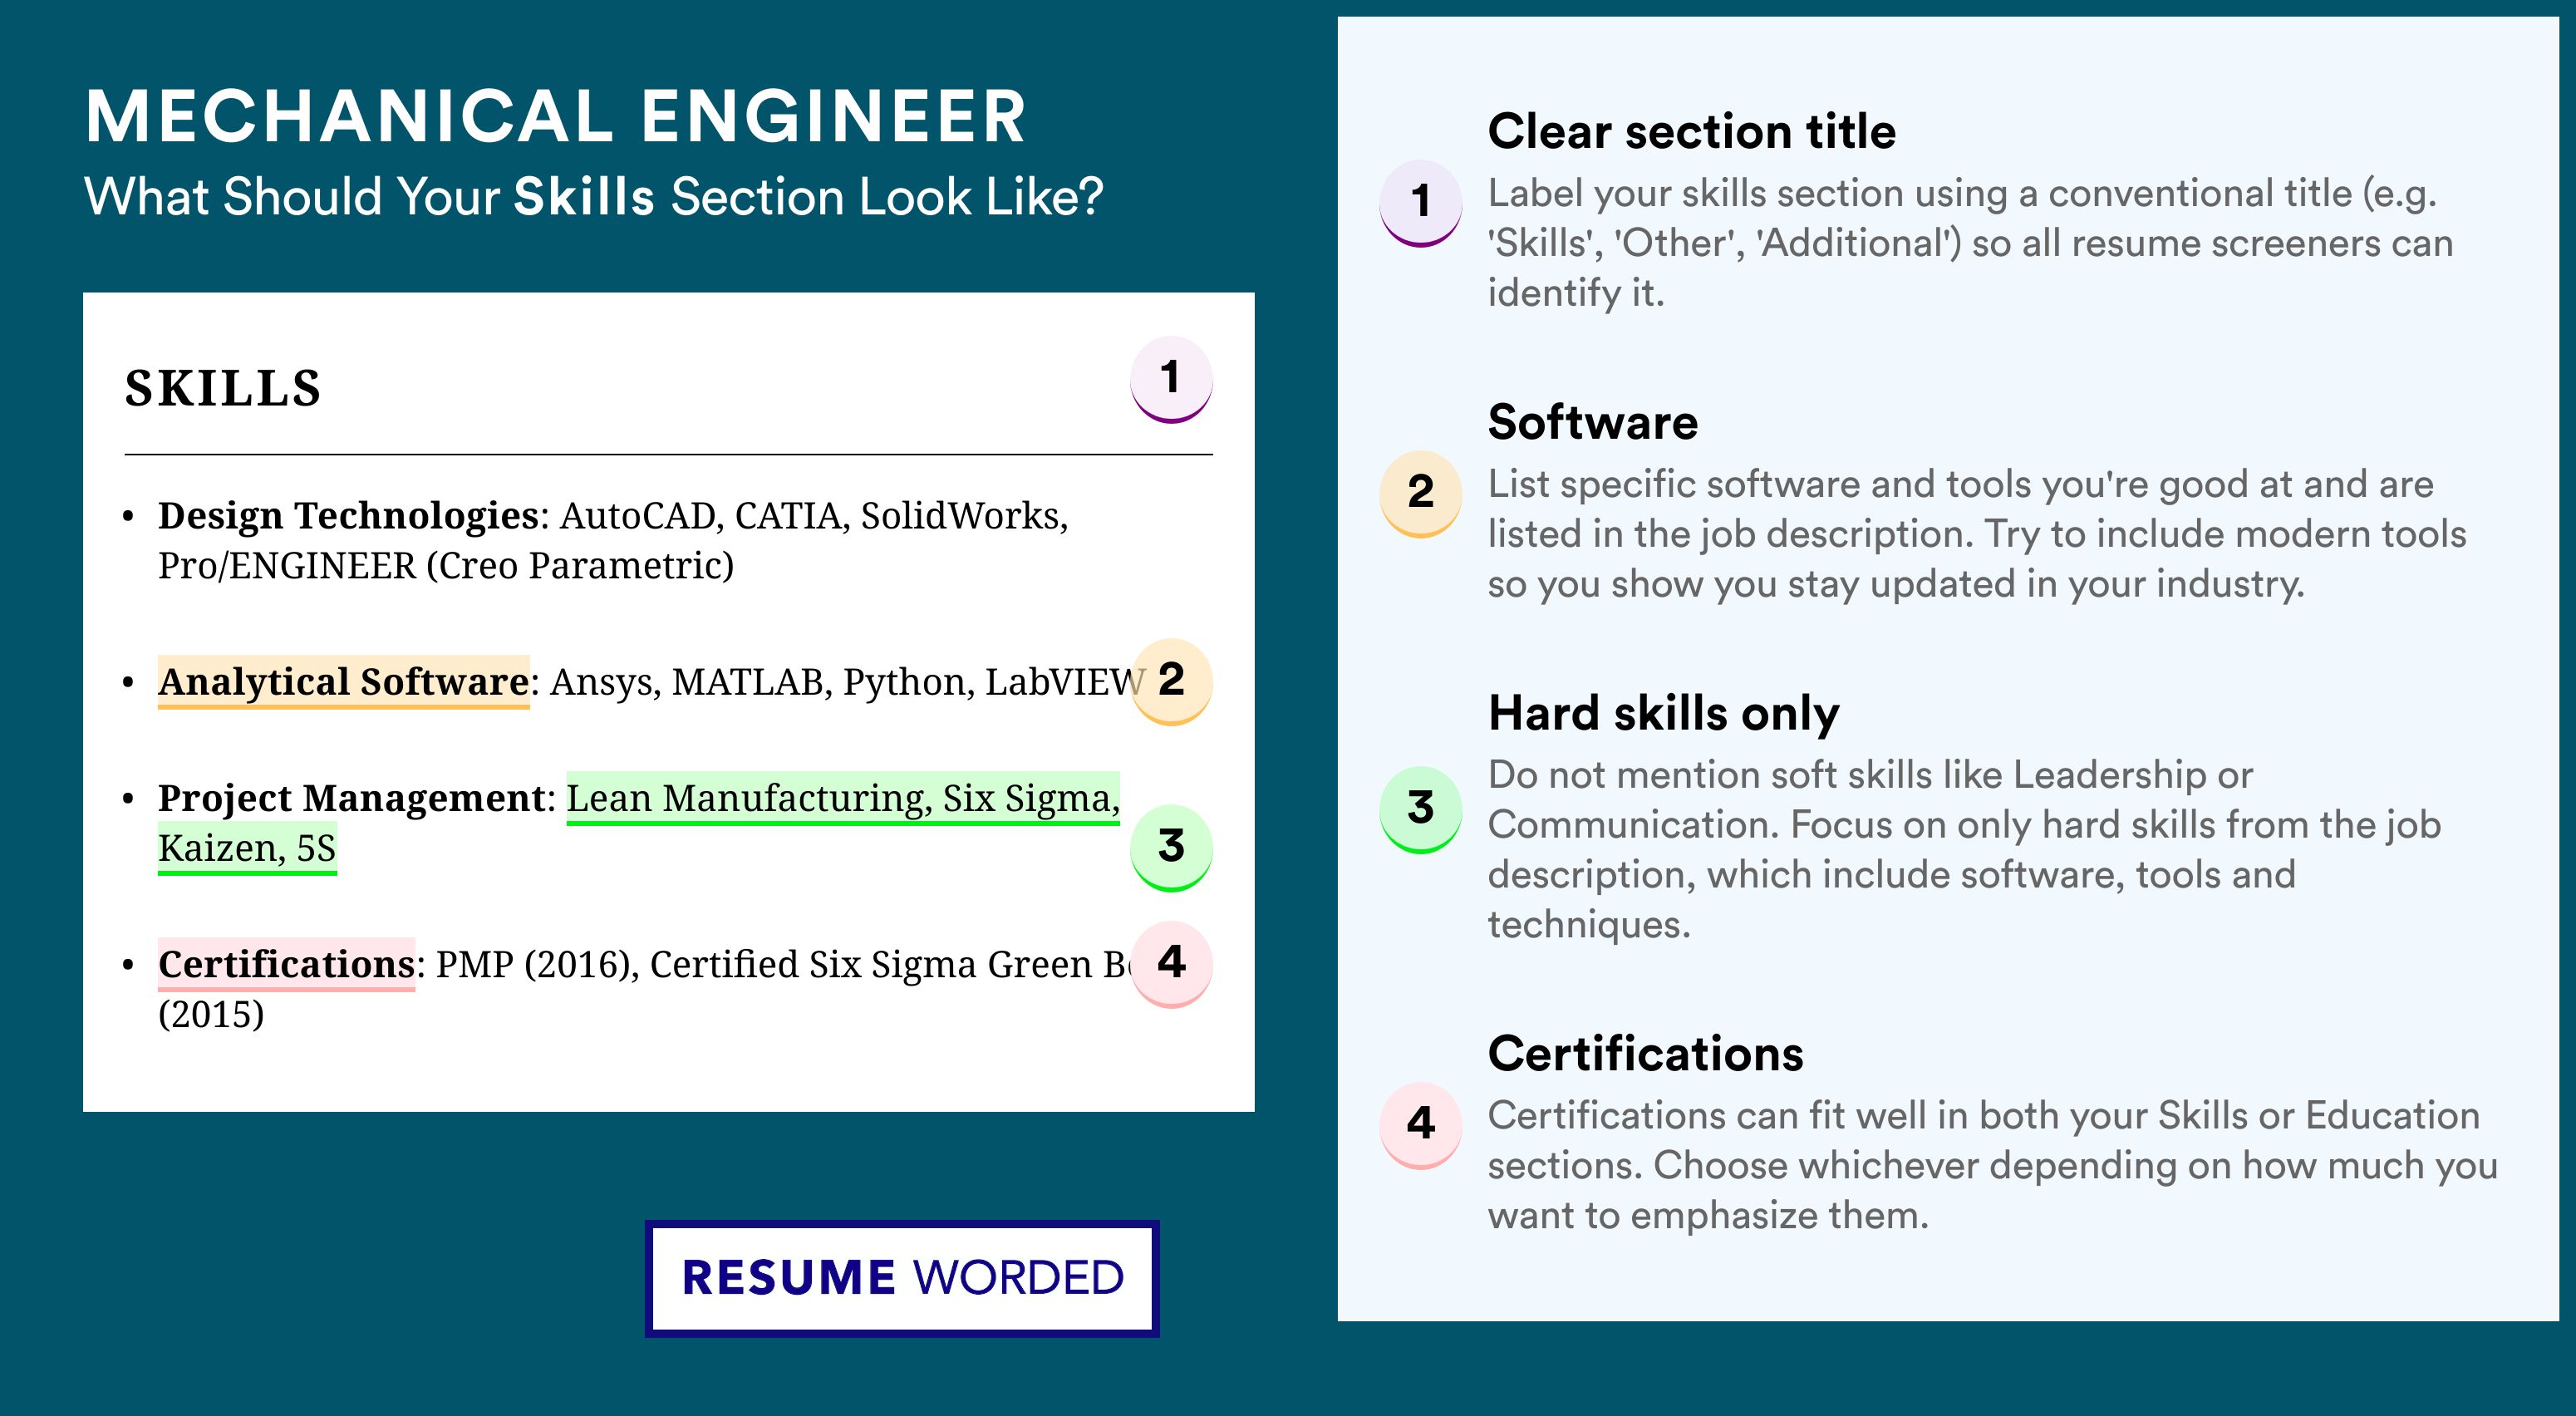 How To Write Your Skills Section - Mechanical Engineer Roles